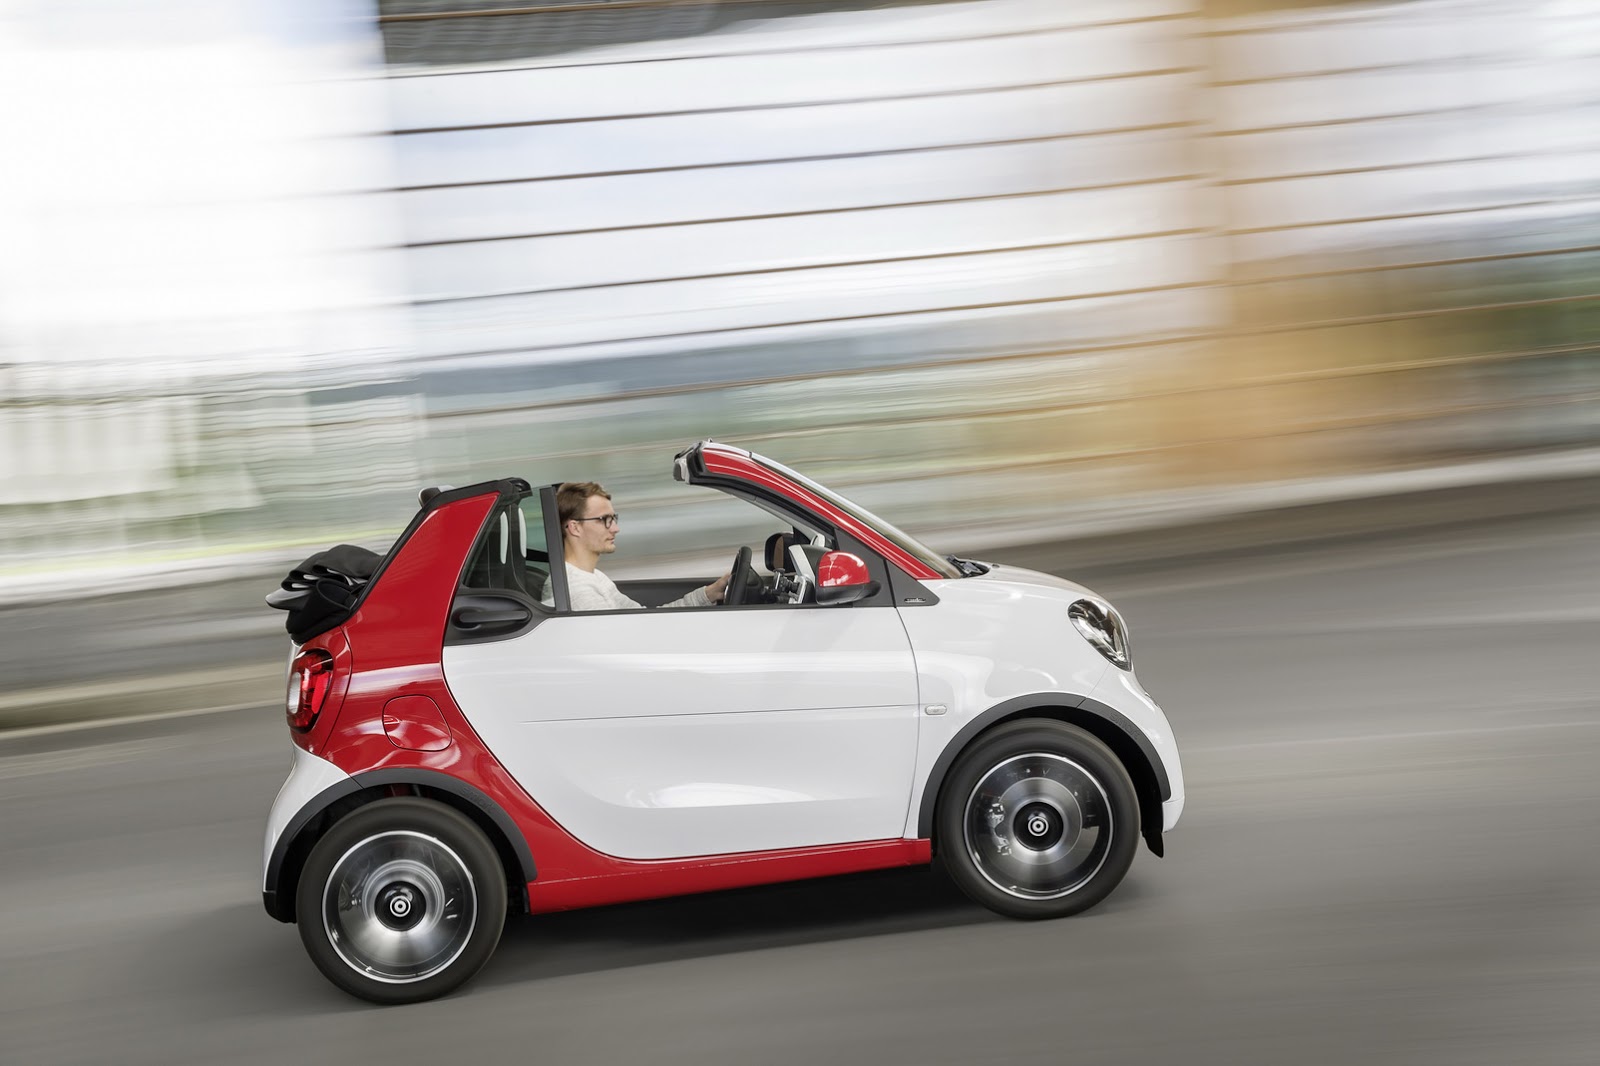 New Smart ForTwo Cabrio Is America's Cheapest Convertible At $18,900